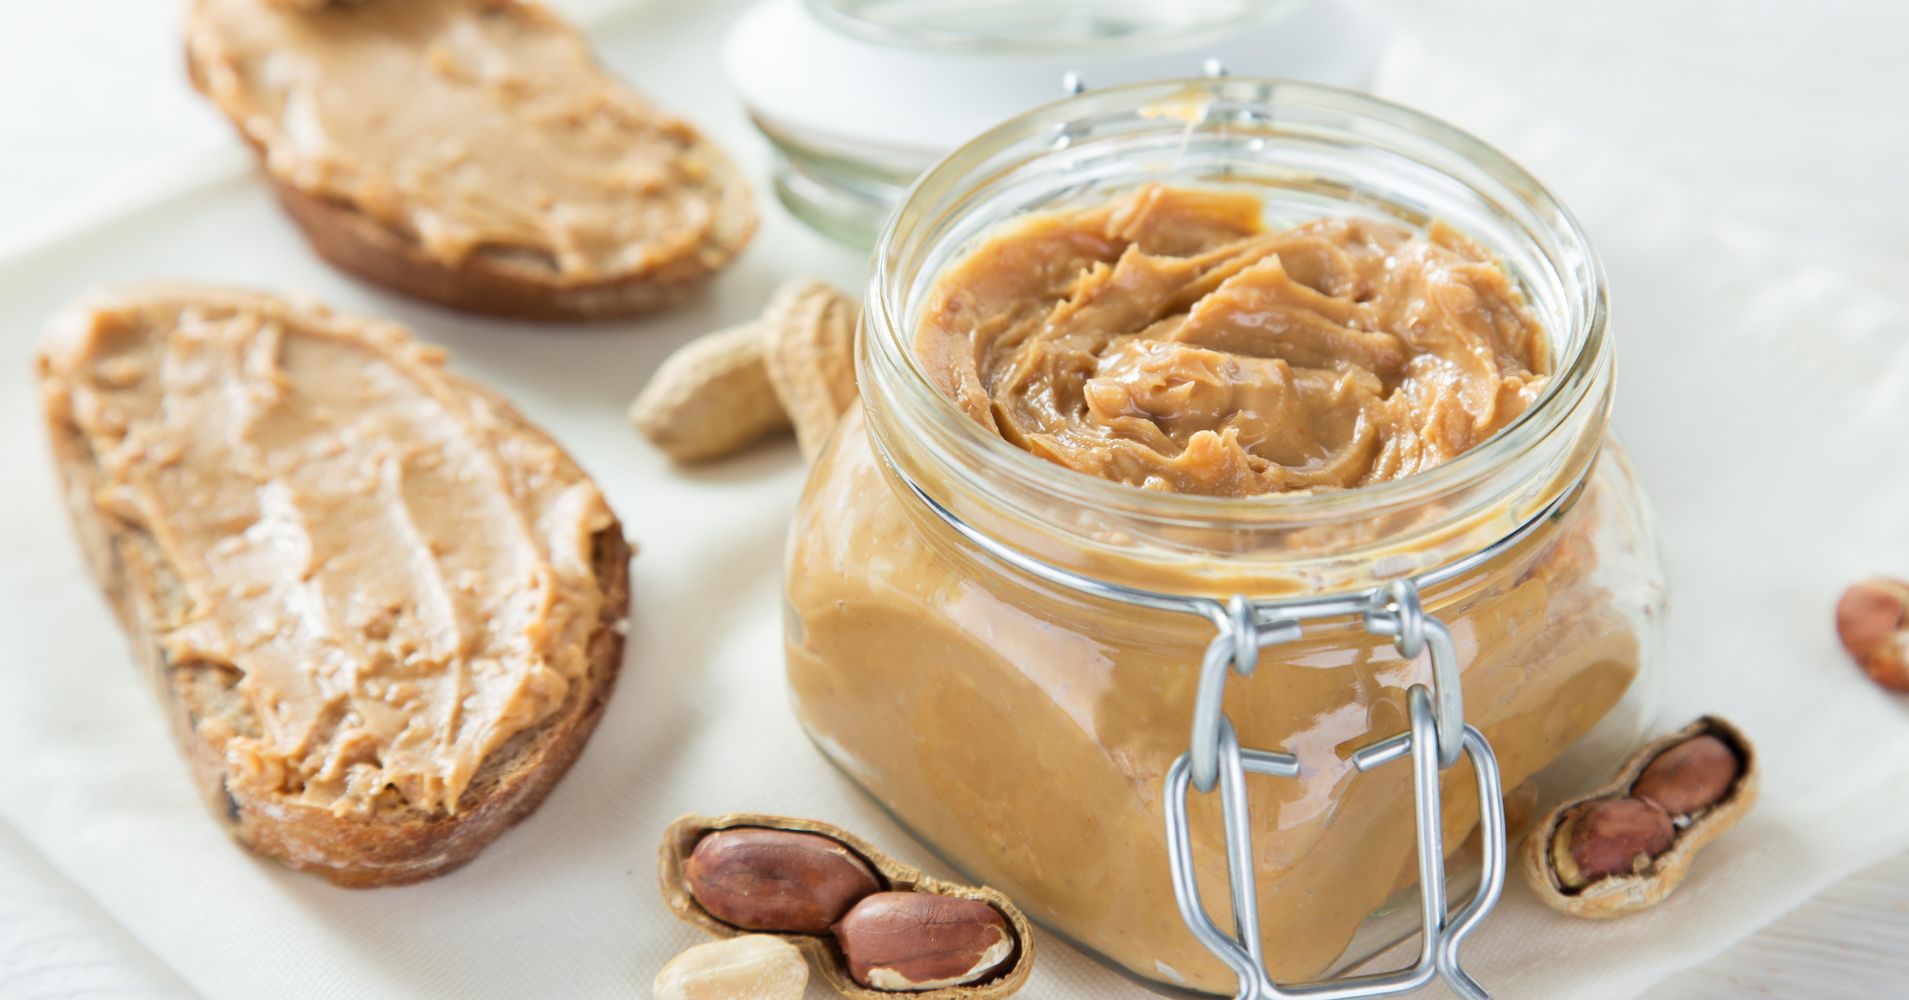 How To Store Natural Peanut Butter